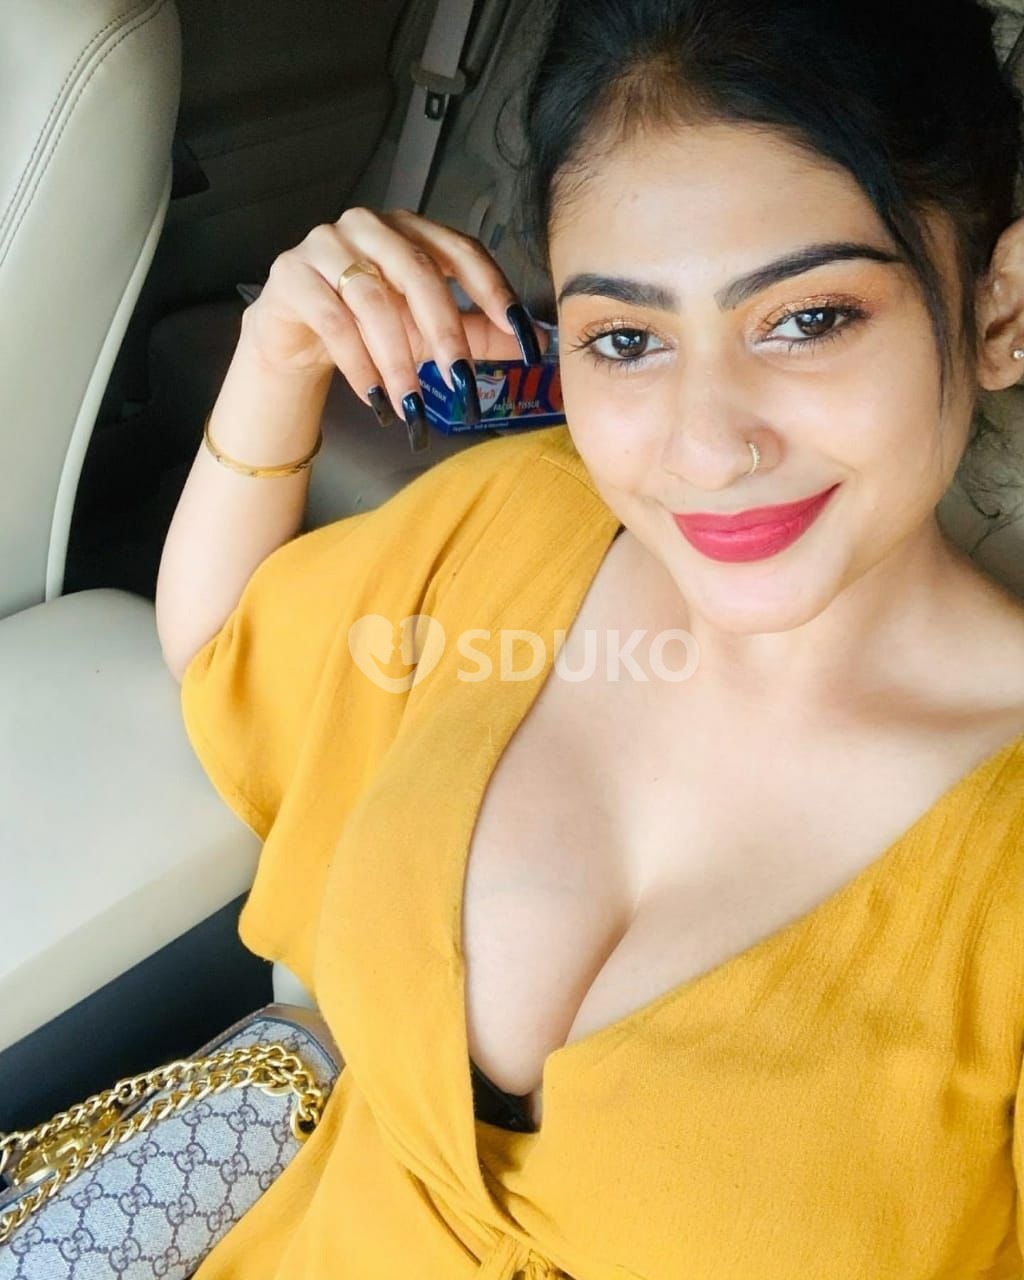 Durgapur 92564/71656 now available call girl full safe and secure without condom sucking kissing all services available